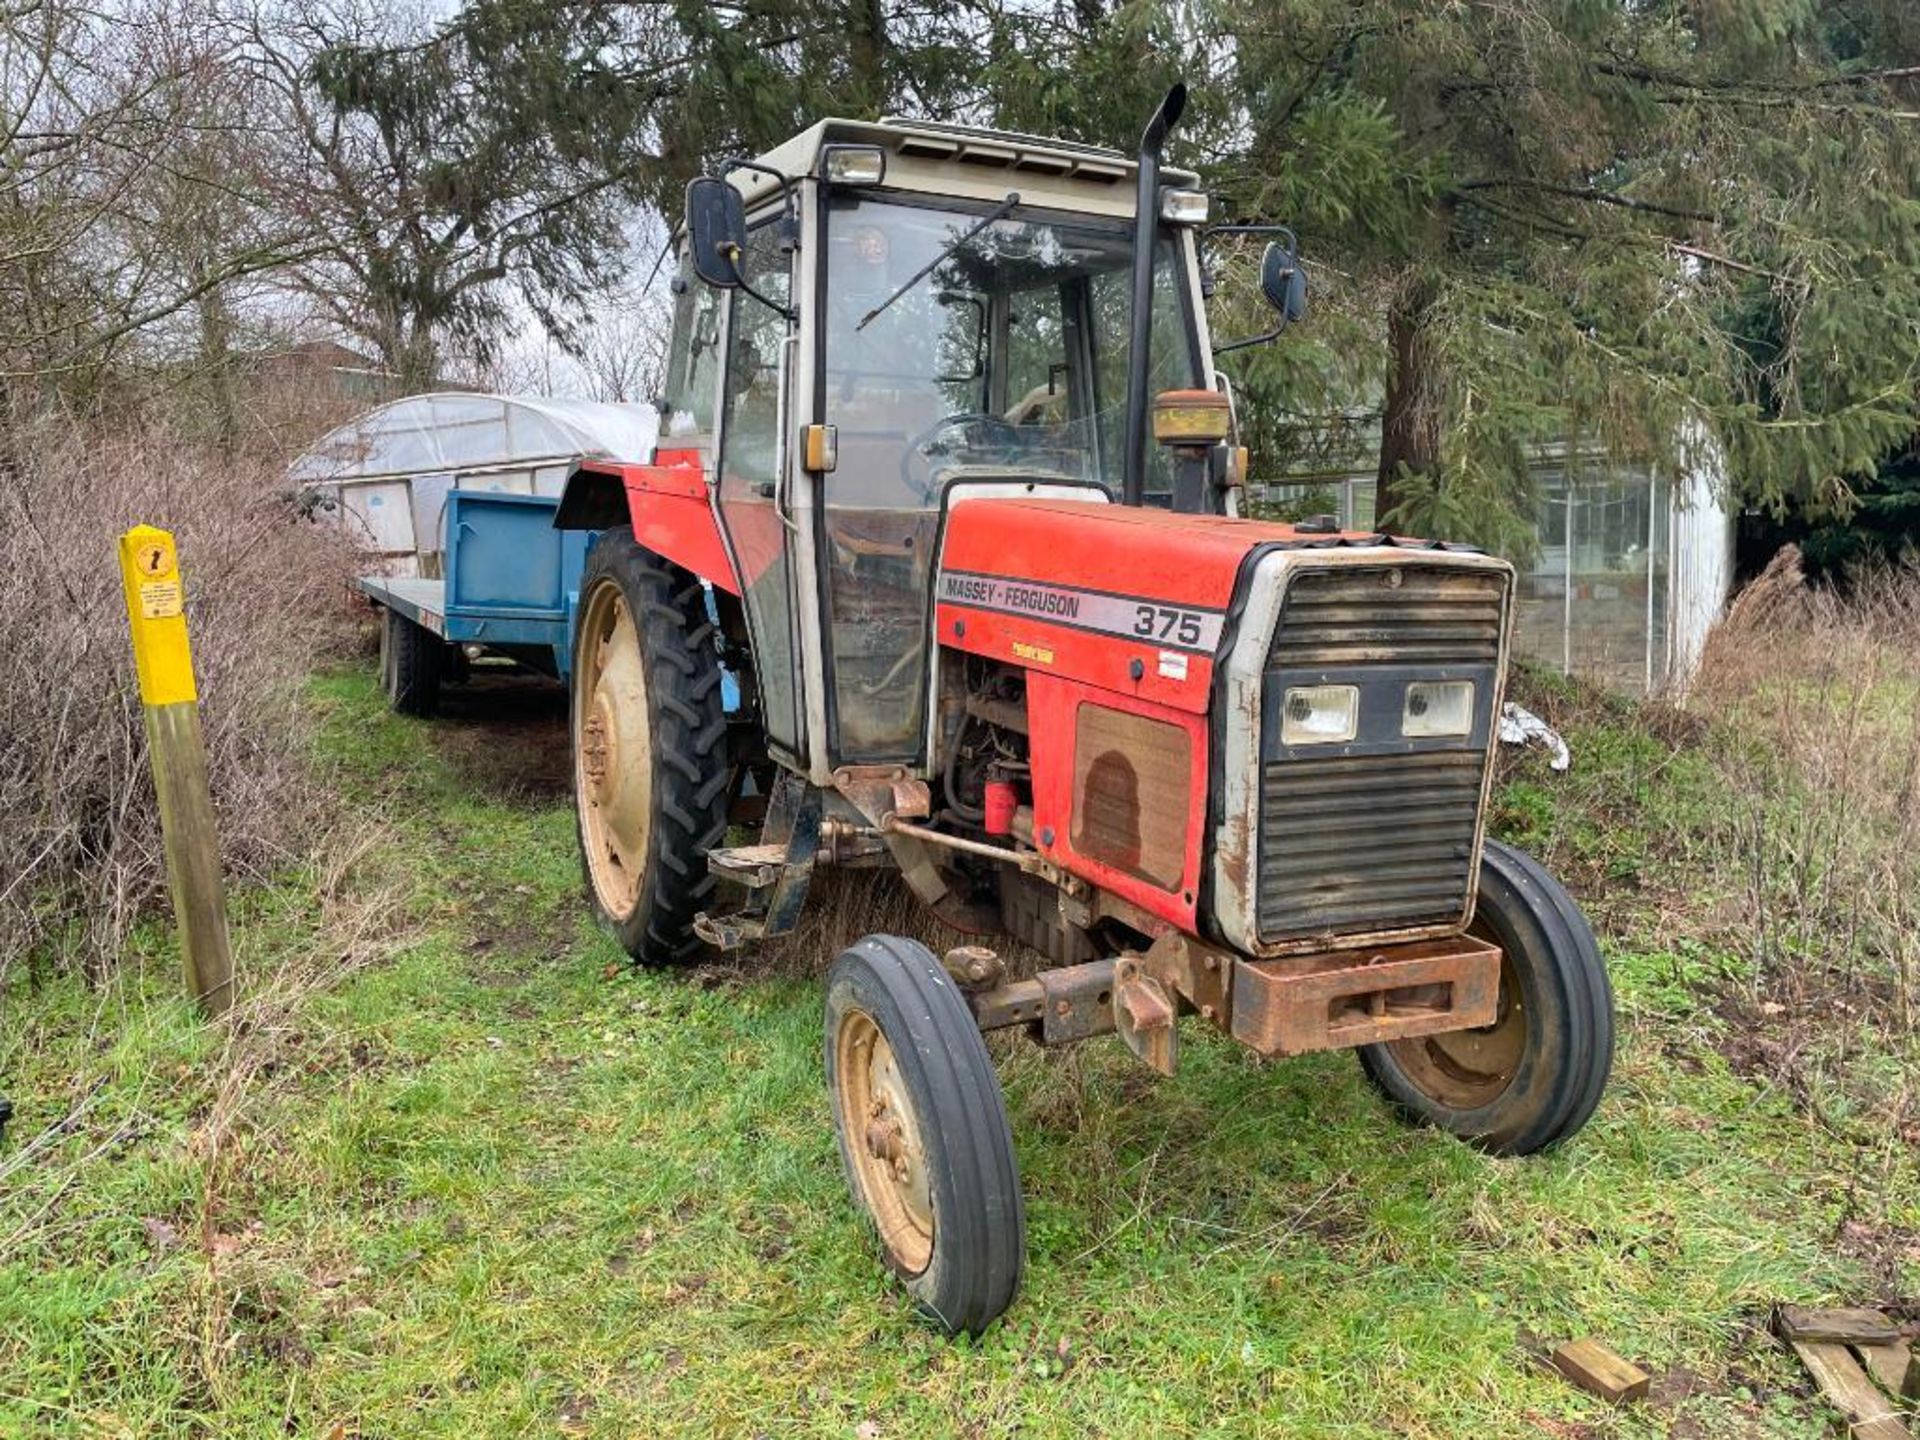 1991 Massey Ferguson 375 2wd tractor with HiLine cab and 2 manual spools on BKT 6.00-19 front and Tr - Image 10 of 13